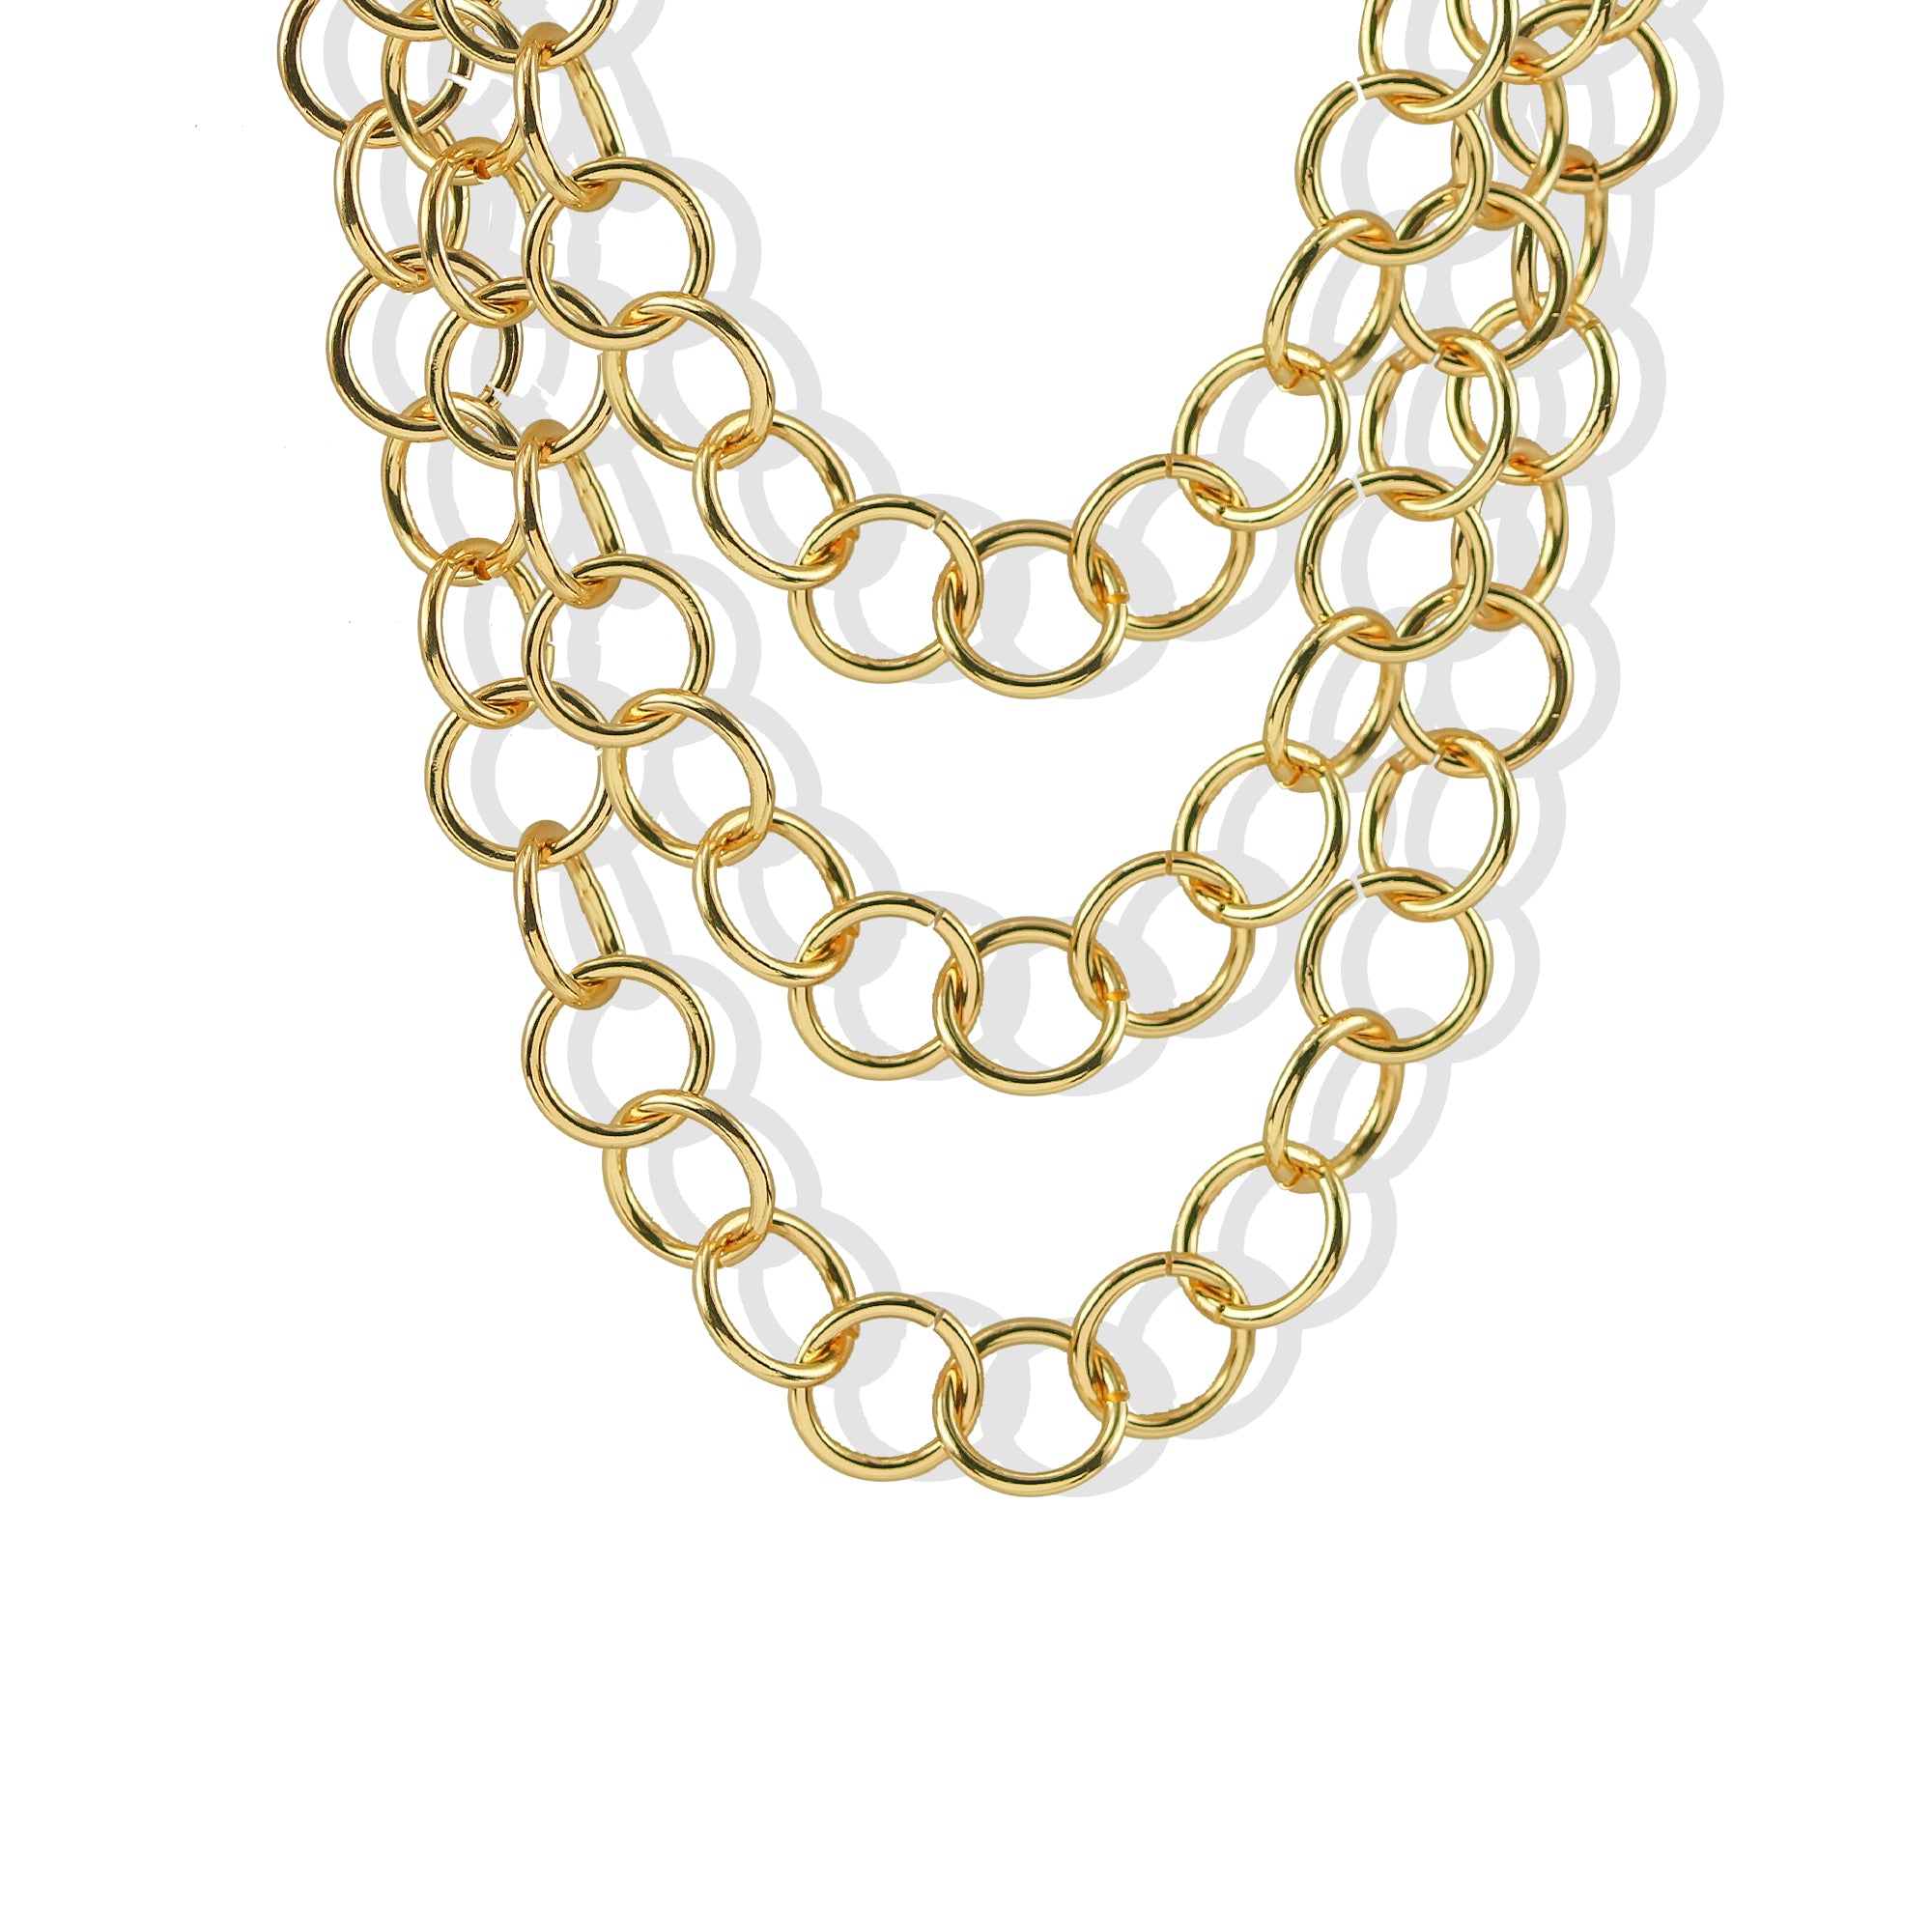 THE LEONETTE LAYERED NECKLACE